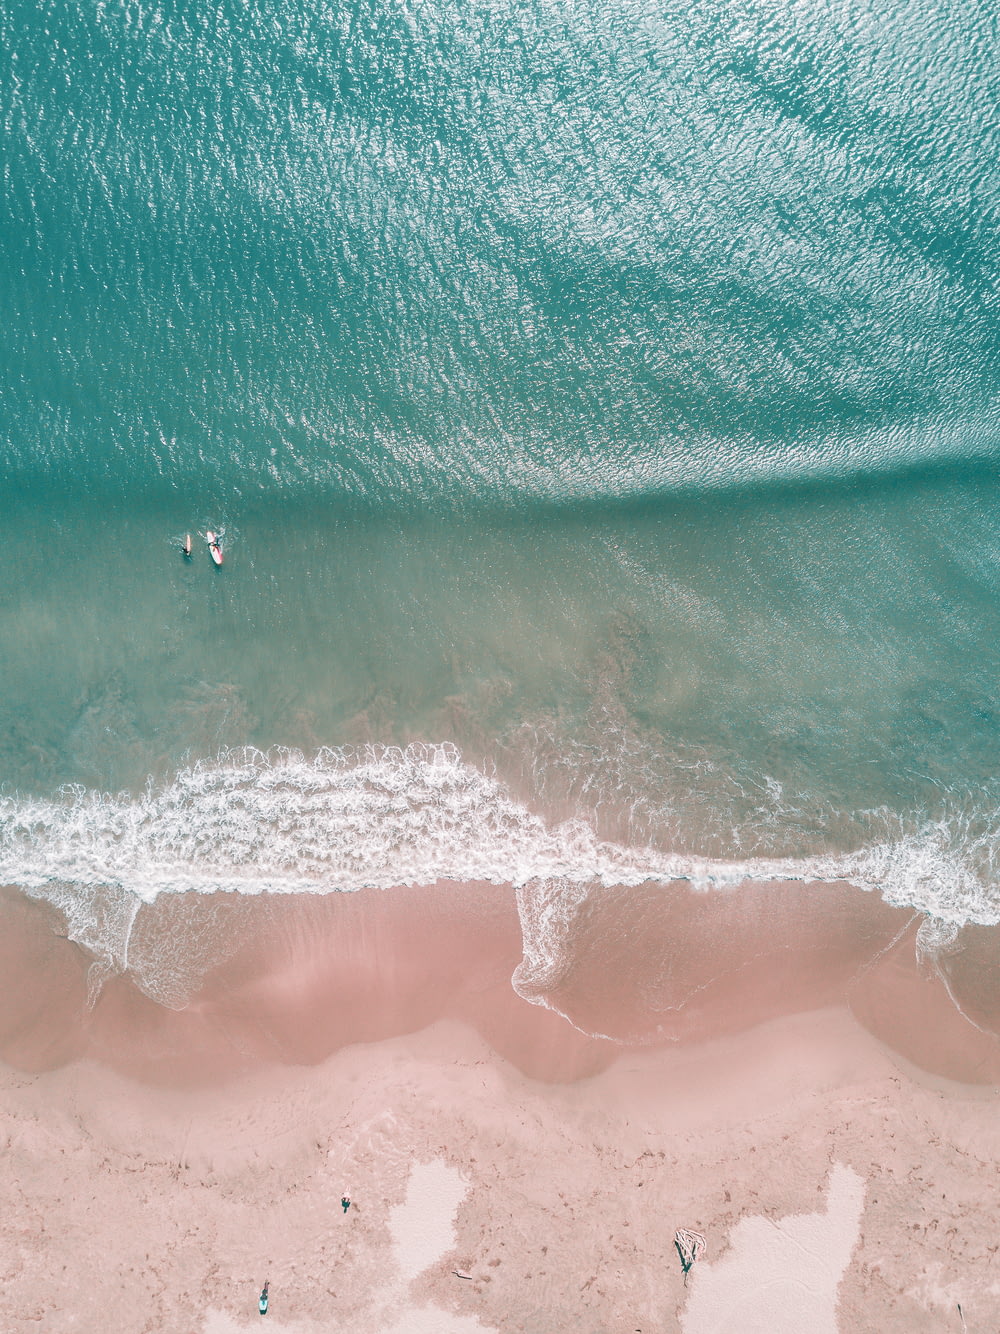 aerial photography of people surfing on seashore during daytime